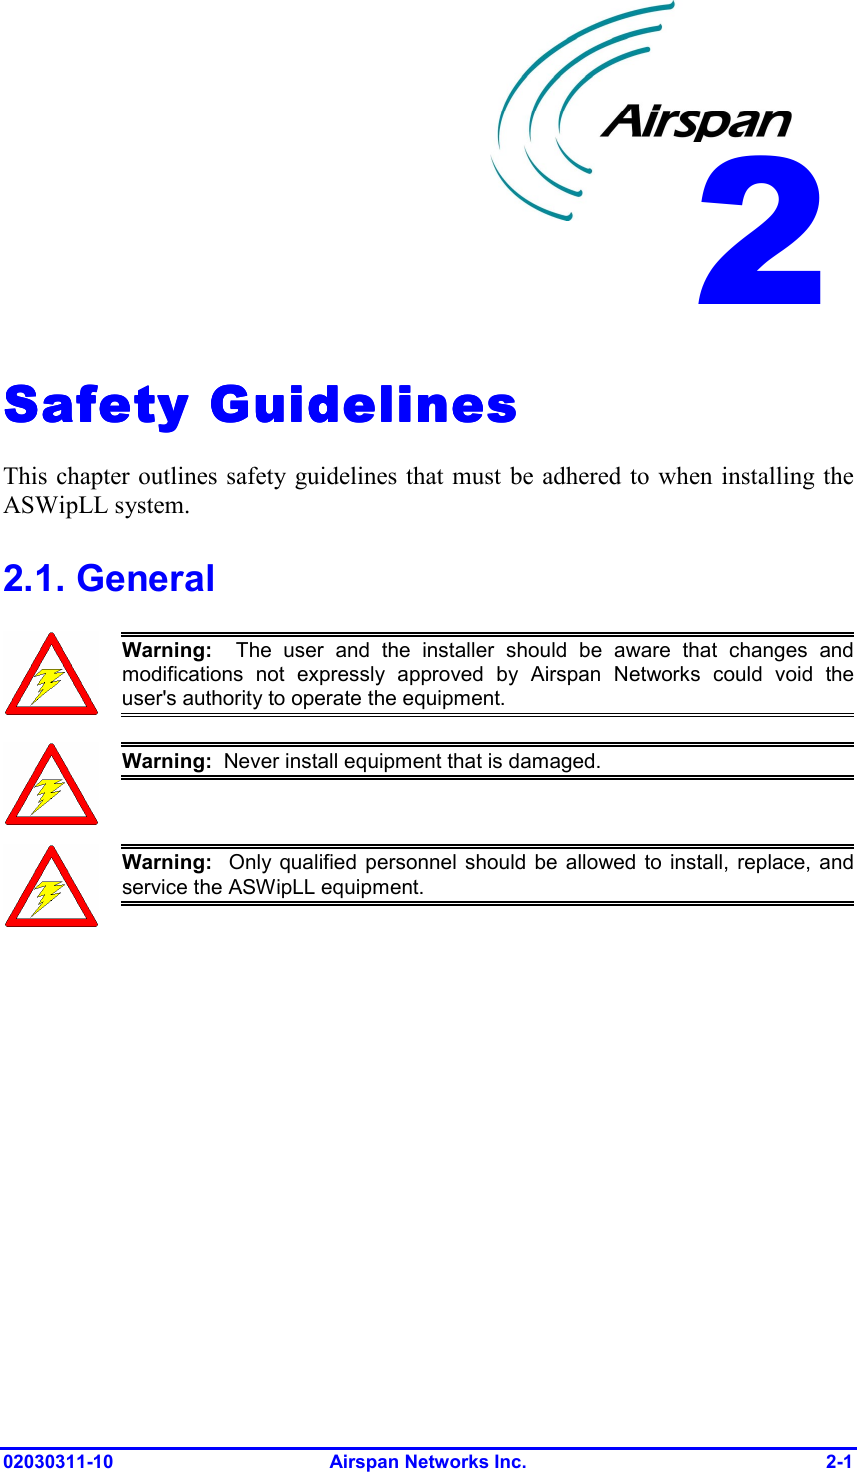  02030311-10 Airspan Networks Inc.  2-1 Safety GuidelinesSafety GuidelinesSafety GuidelinesSafety Guidelines    This chapter outlines safety guidelines that must be adhered to when installing the ASWipLL system. 2.1. General  Warning:  The user and the installer should be aware that changes andmodifications not expressly approved by Airspan Networks could void theuser&apos;s authority to operate the equipment.  Warning:  Never install equipment that is damaged.  Warning:  Only qualified personnel should be allowed to install, replace, andservice the ASWipLL equipment.  2 